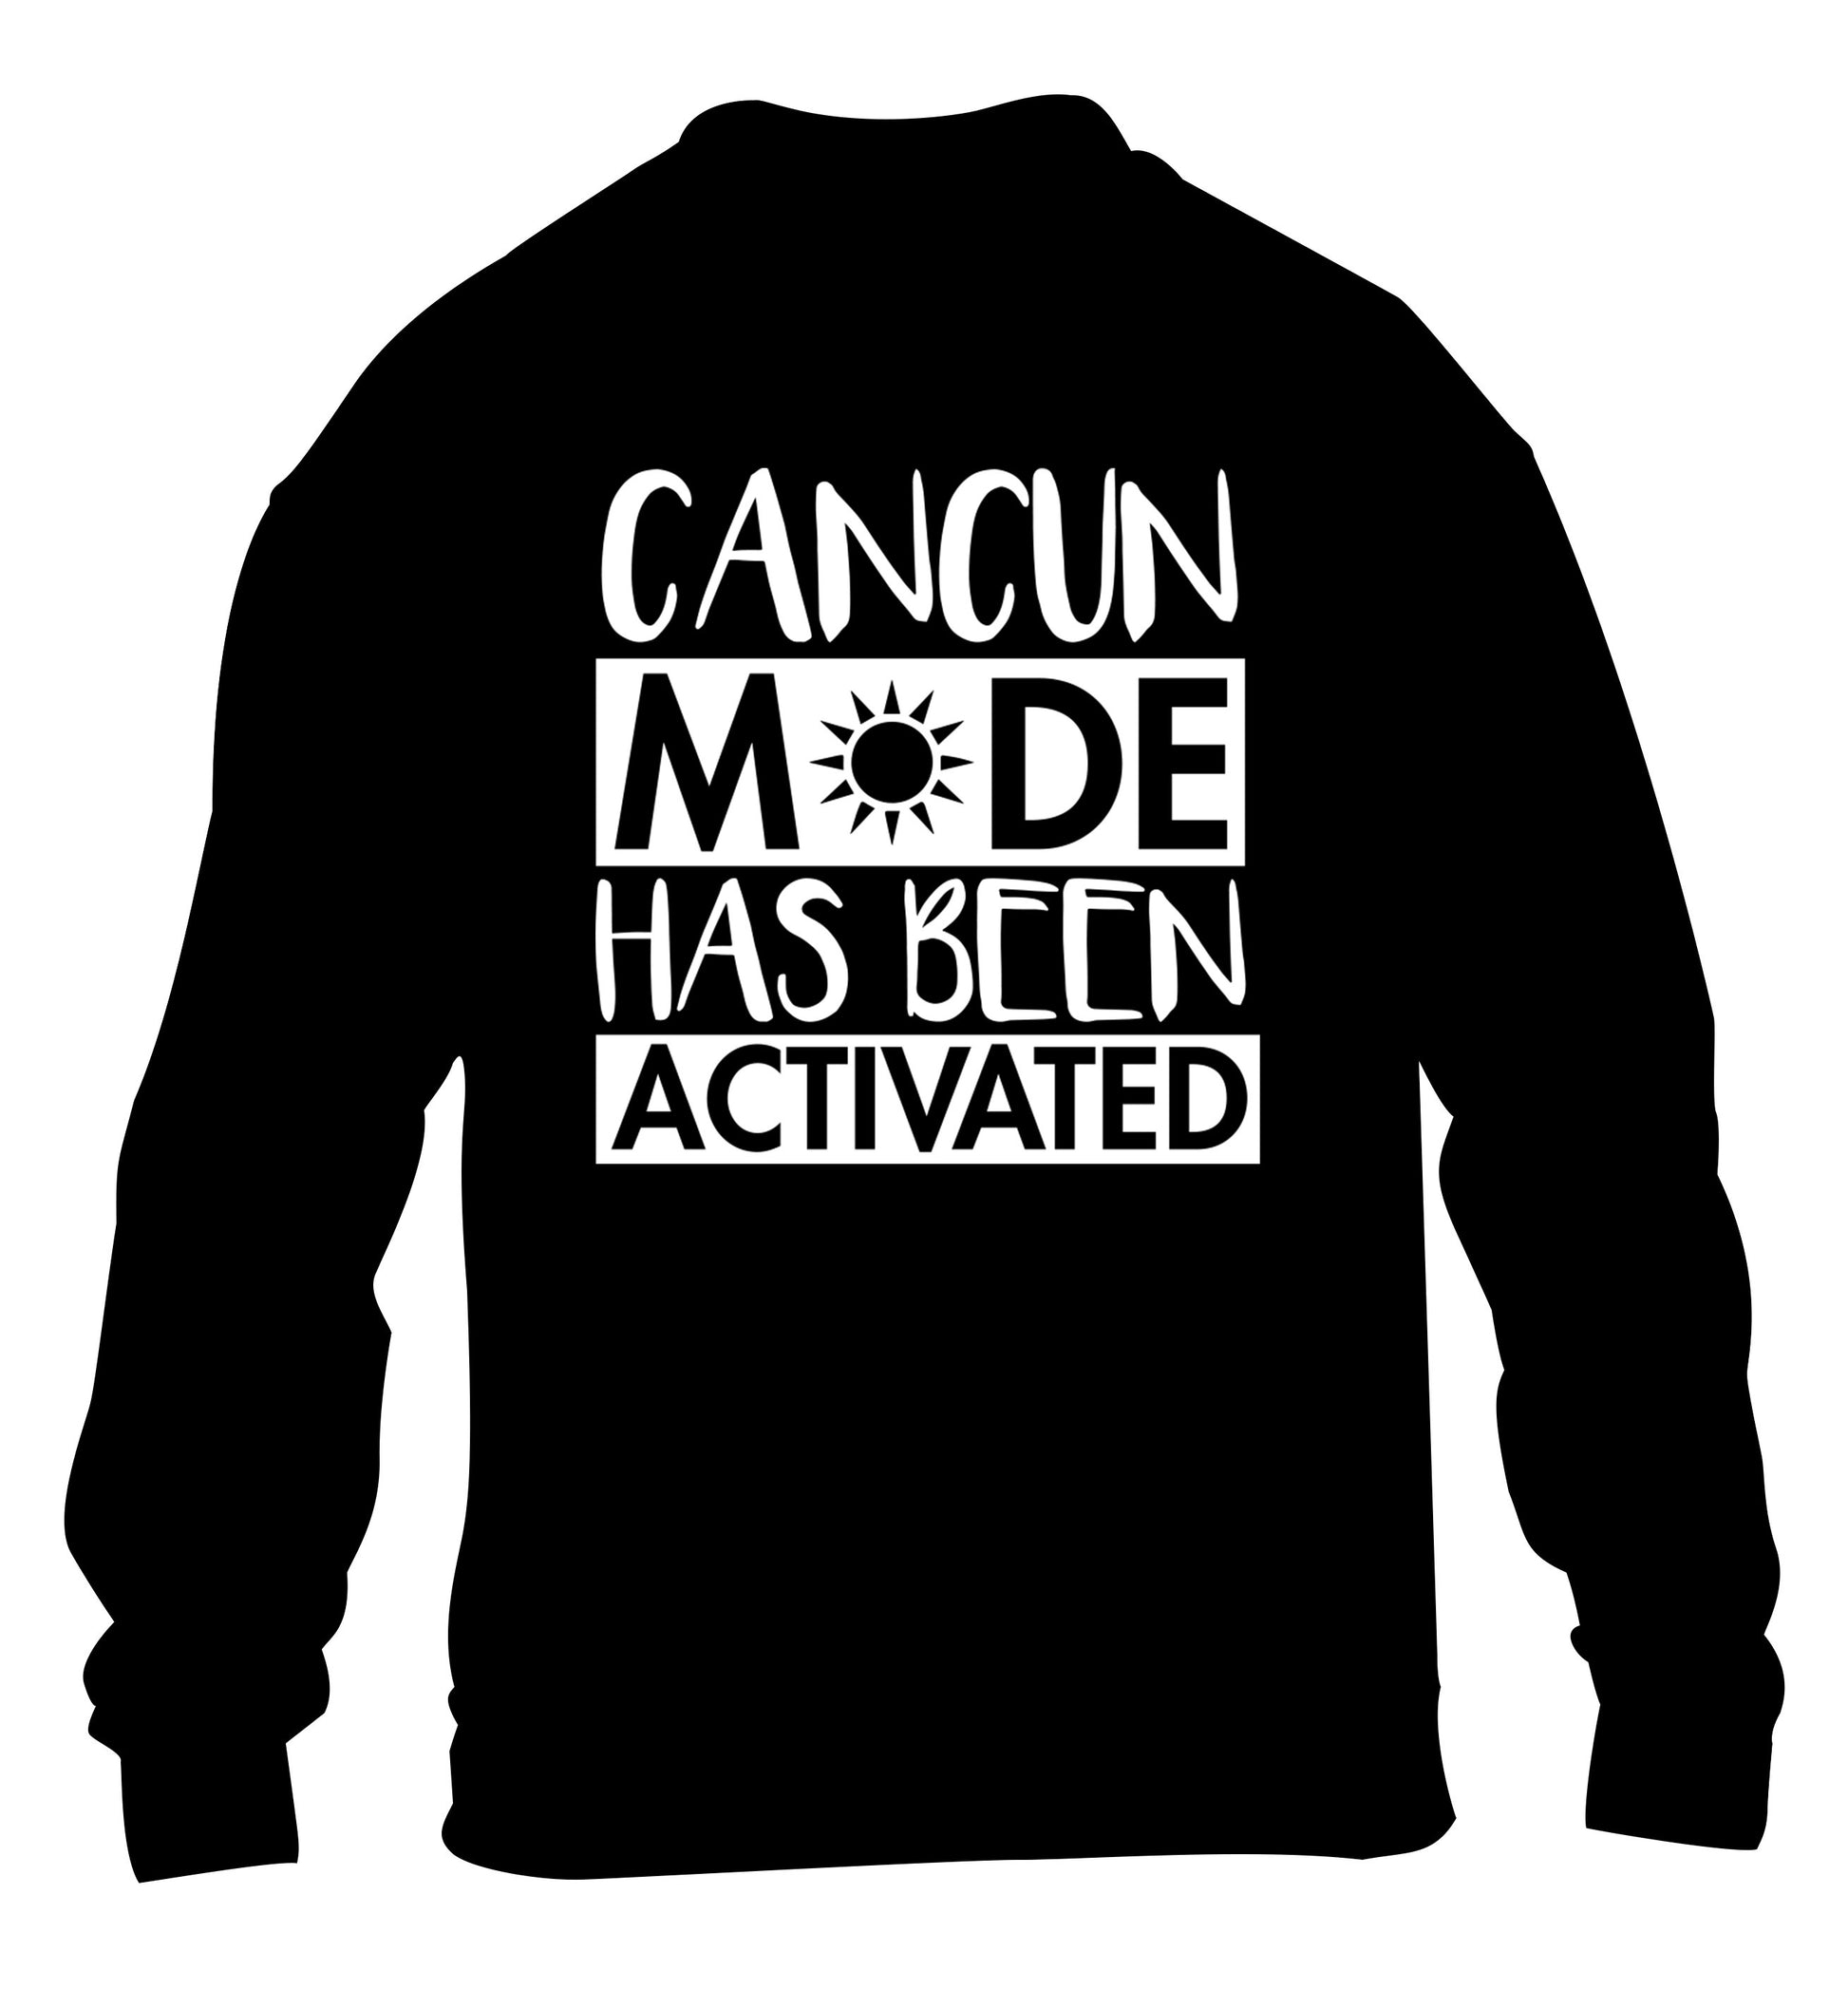 Cancun mode has been activated children's black sweater 12-14 Years